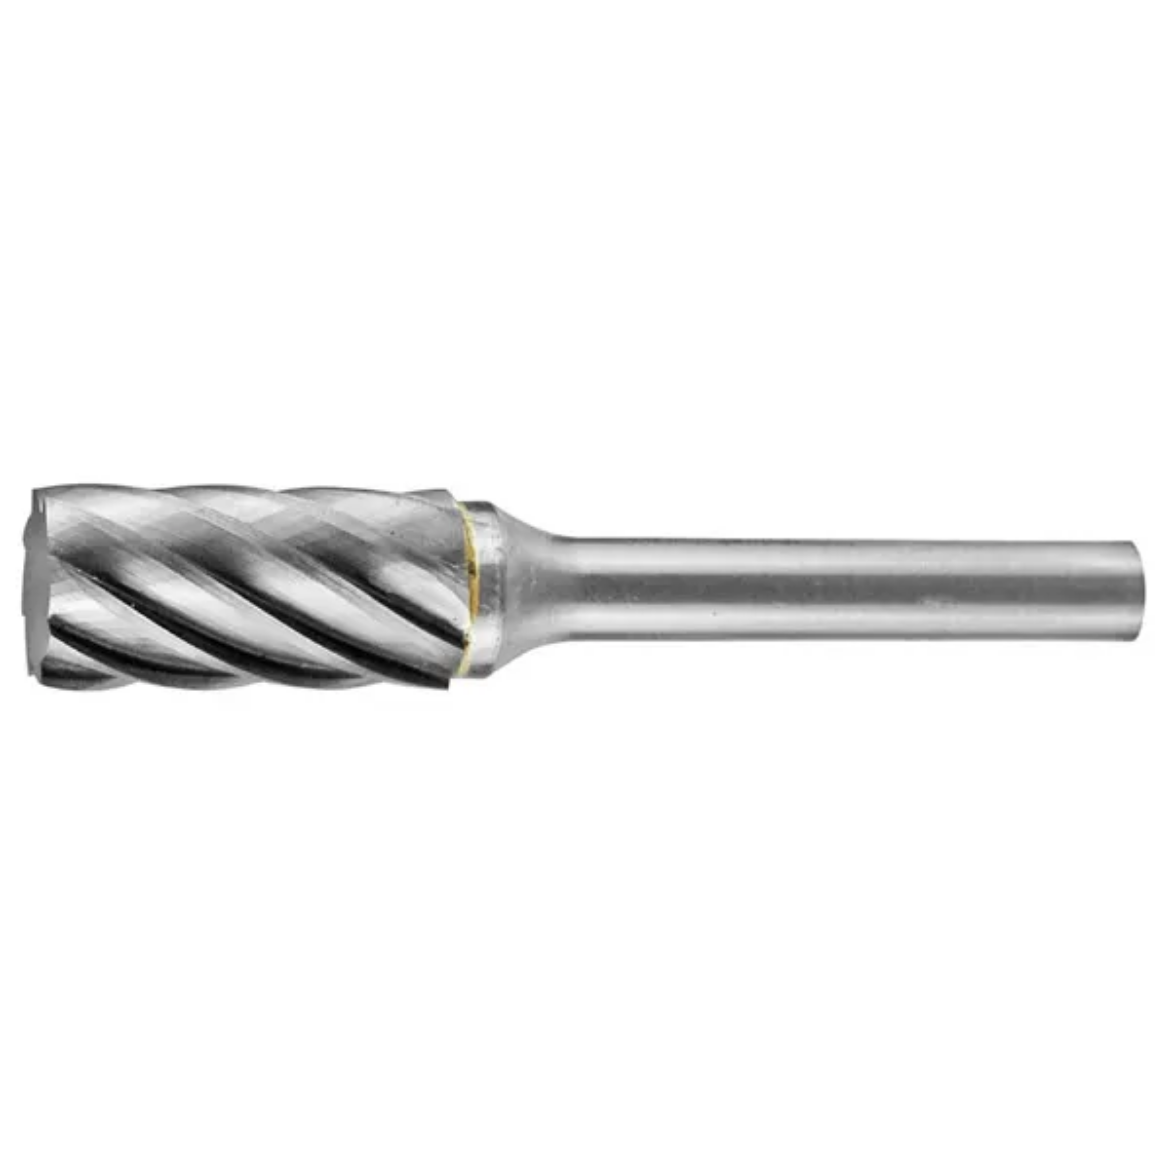 Picture of HOLEMAKER CARBIDE BURR CYLINDRICAL SQUARE END 3/8" X 3/4" HEAD 1/4" SHANK AC